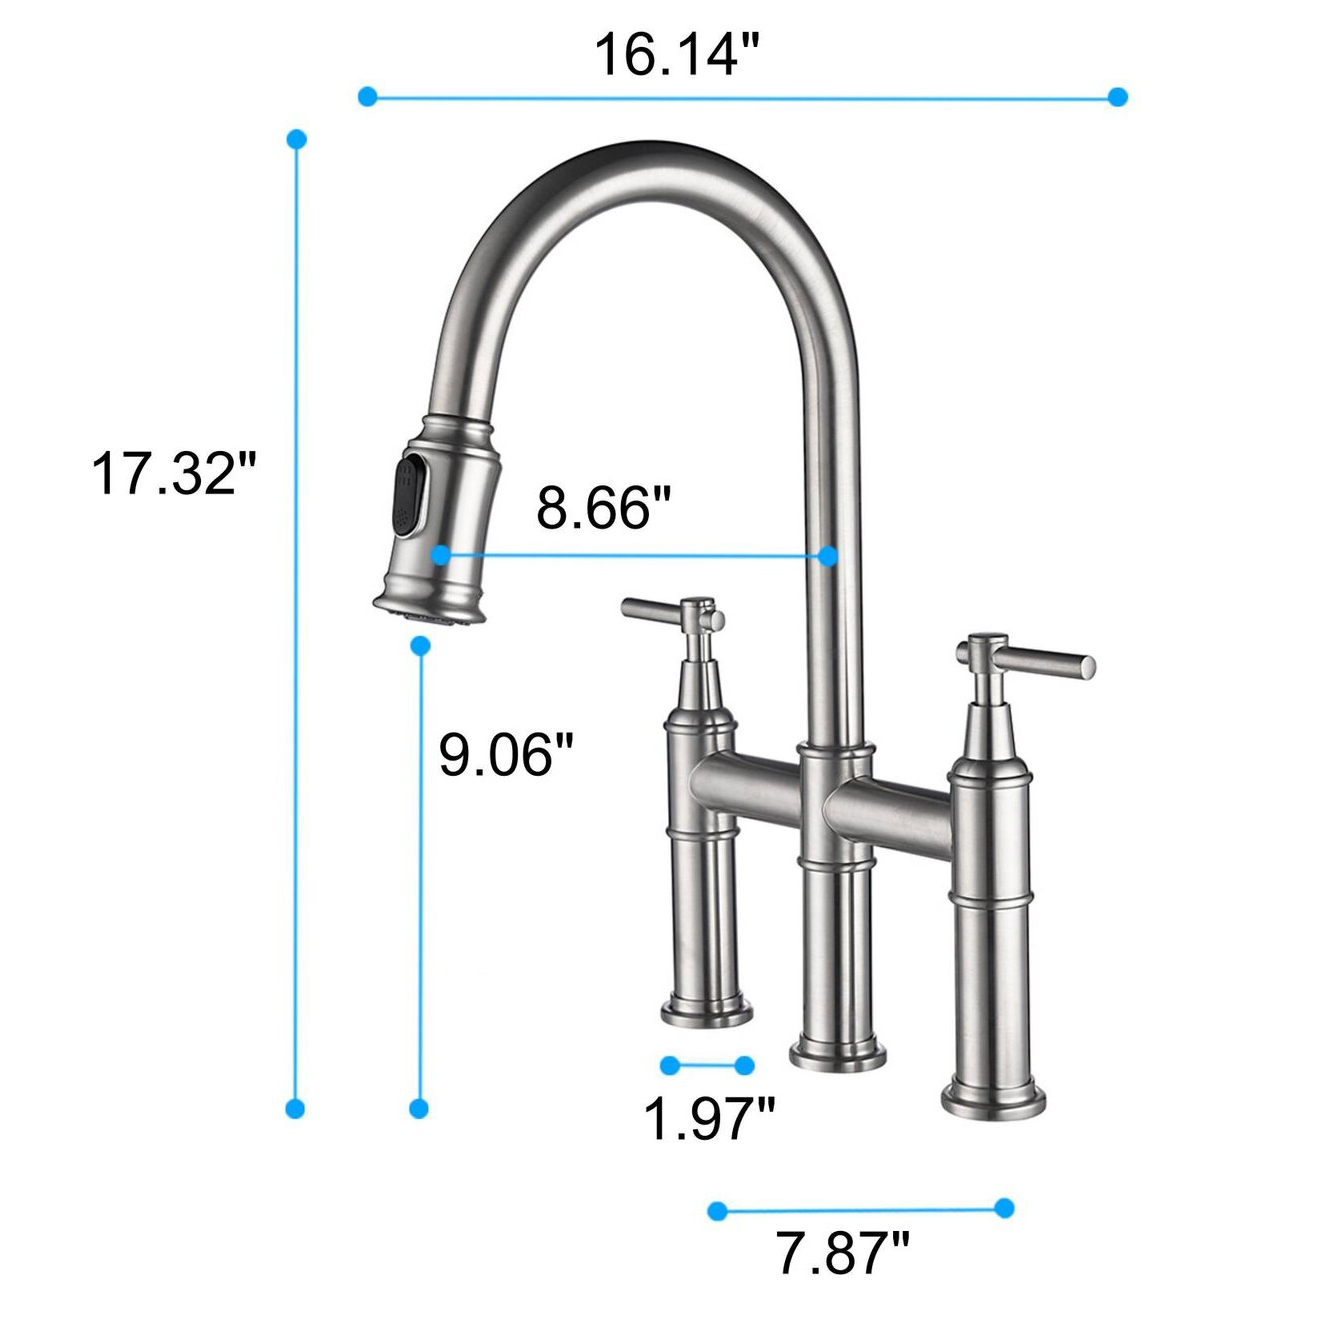 Aquacubic Three Hole Two Lever Handles Transitional Bridge Kitchen Faucet with Pull Down Sprayer in Polished Chrome